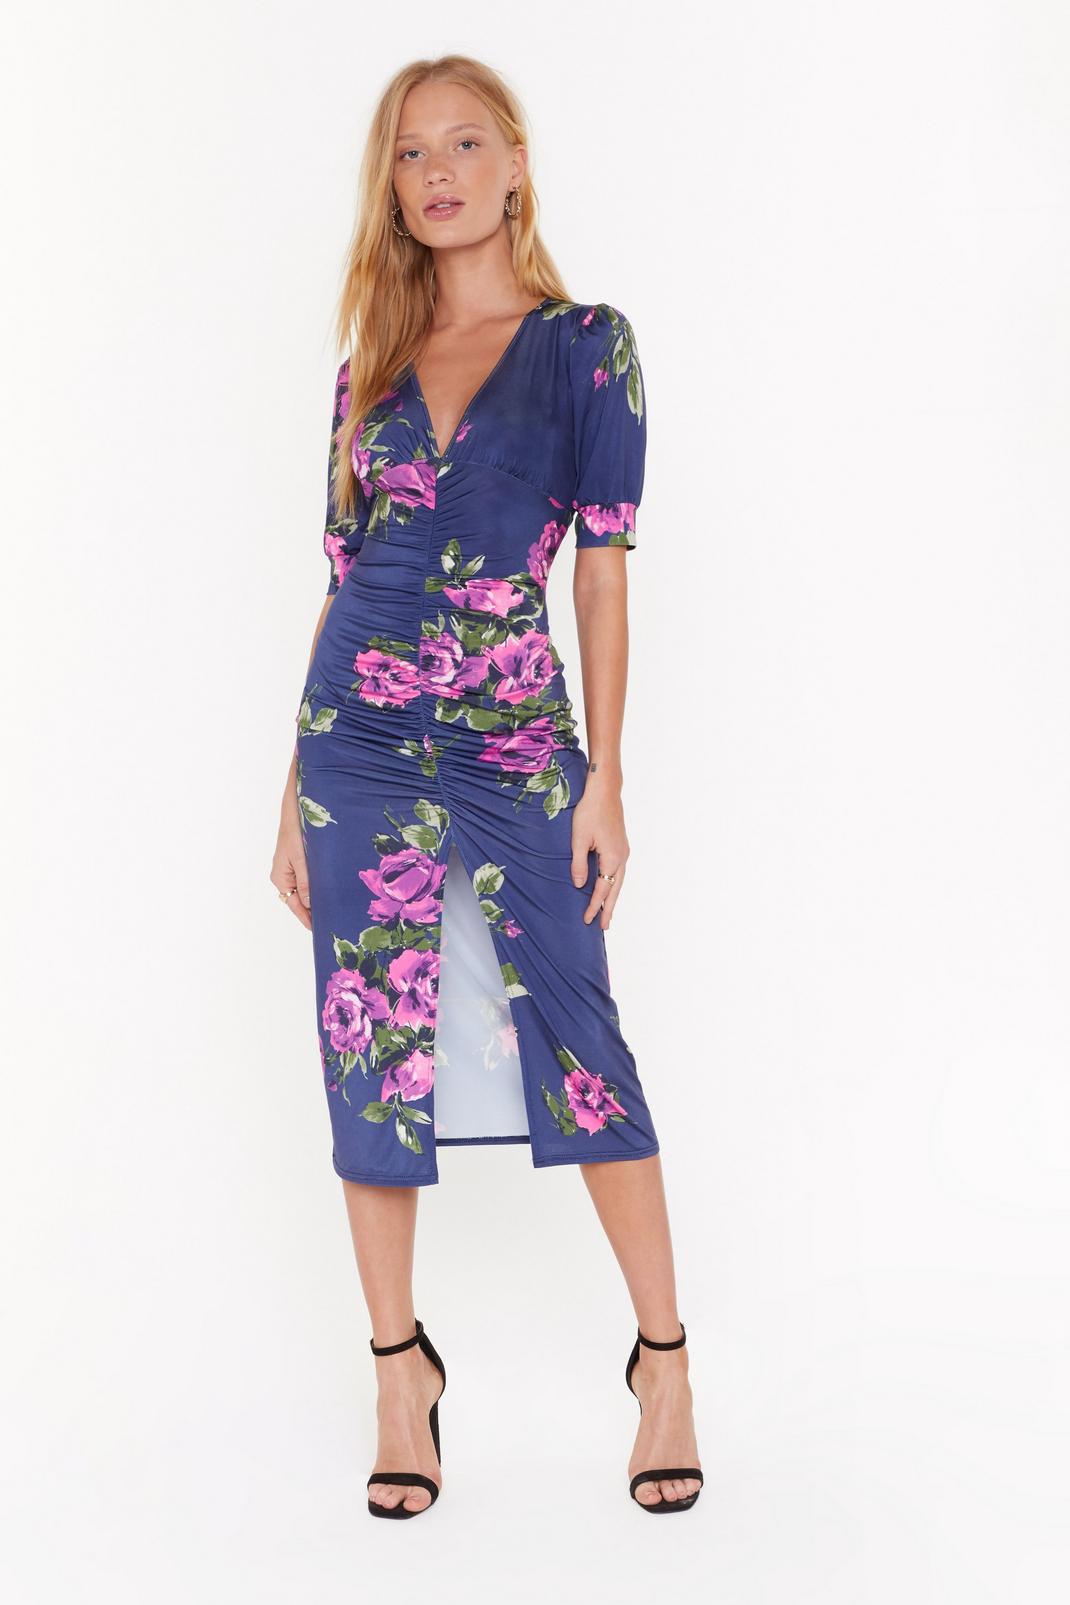 Black Make the Best of a Bud Situation Floral Midi Dress image number 1